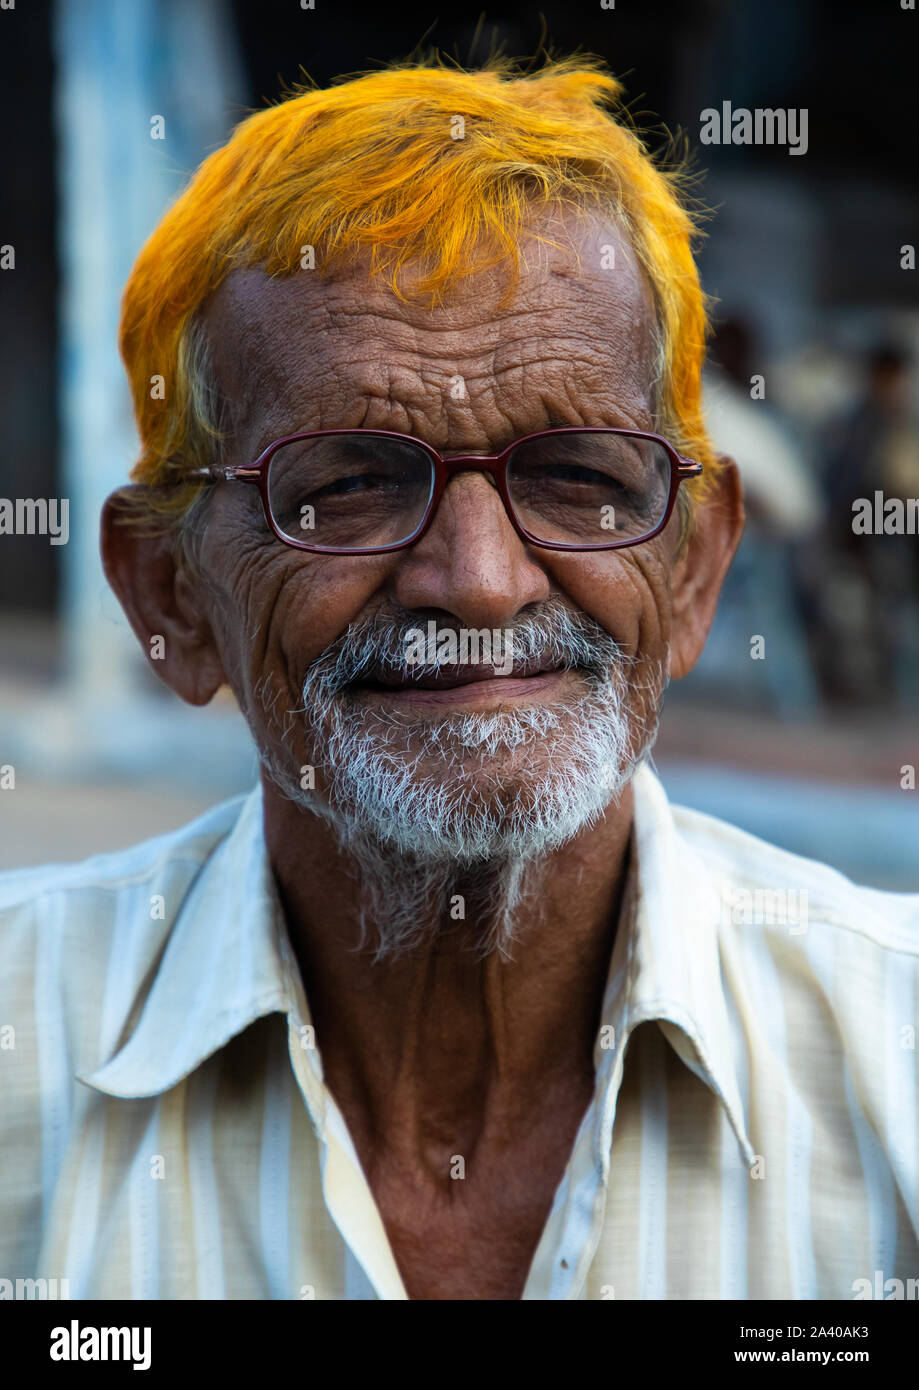 Portrait of a man with ginger hair, Rajasthan, Jodhpur, India Stock Photo